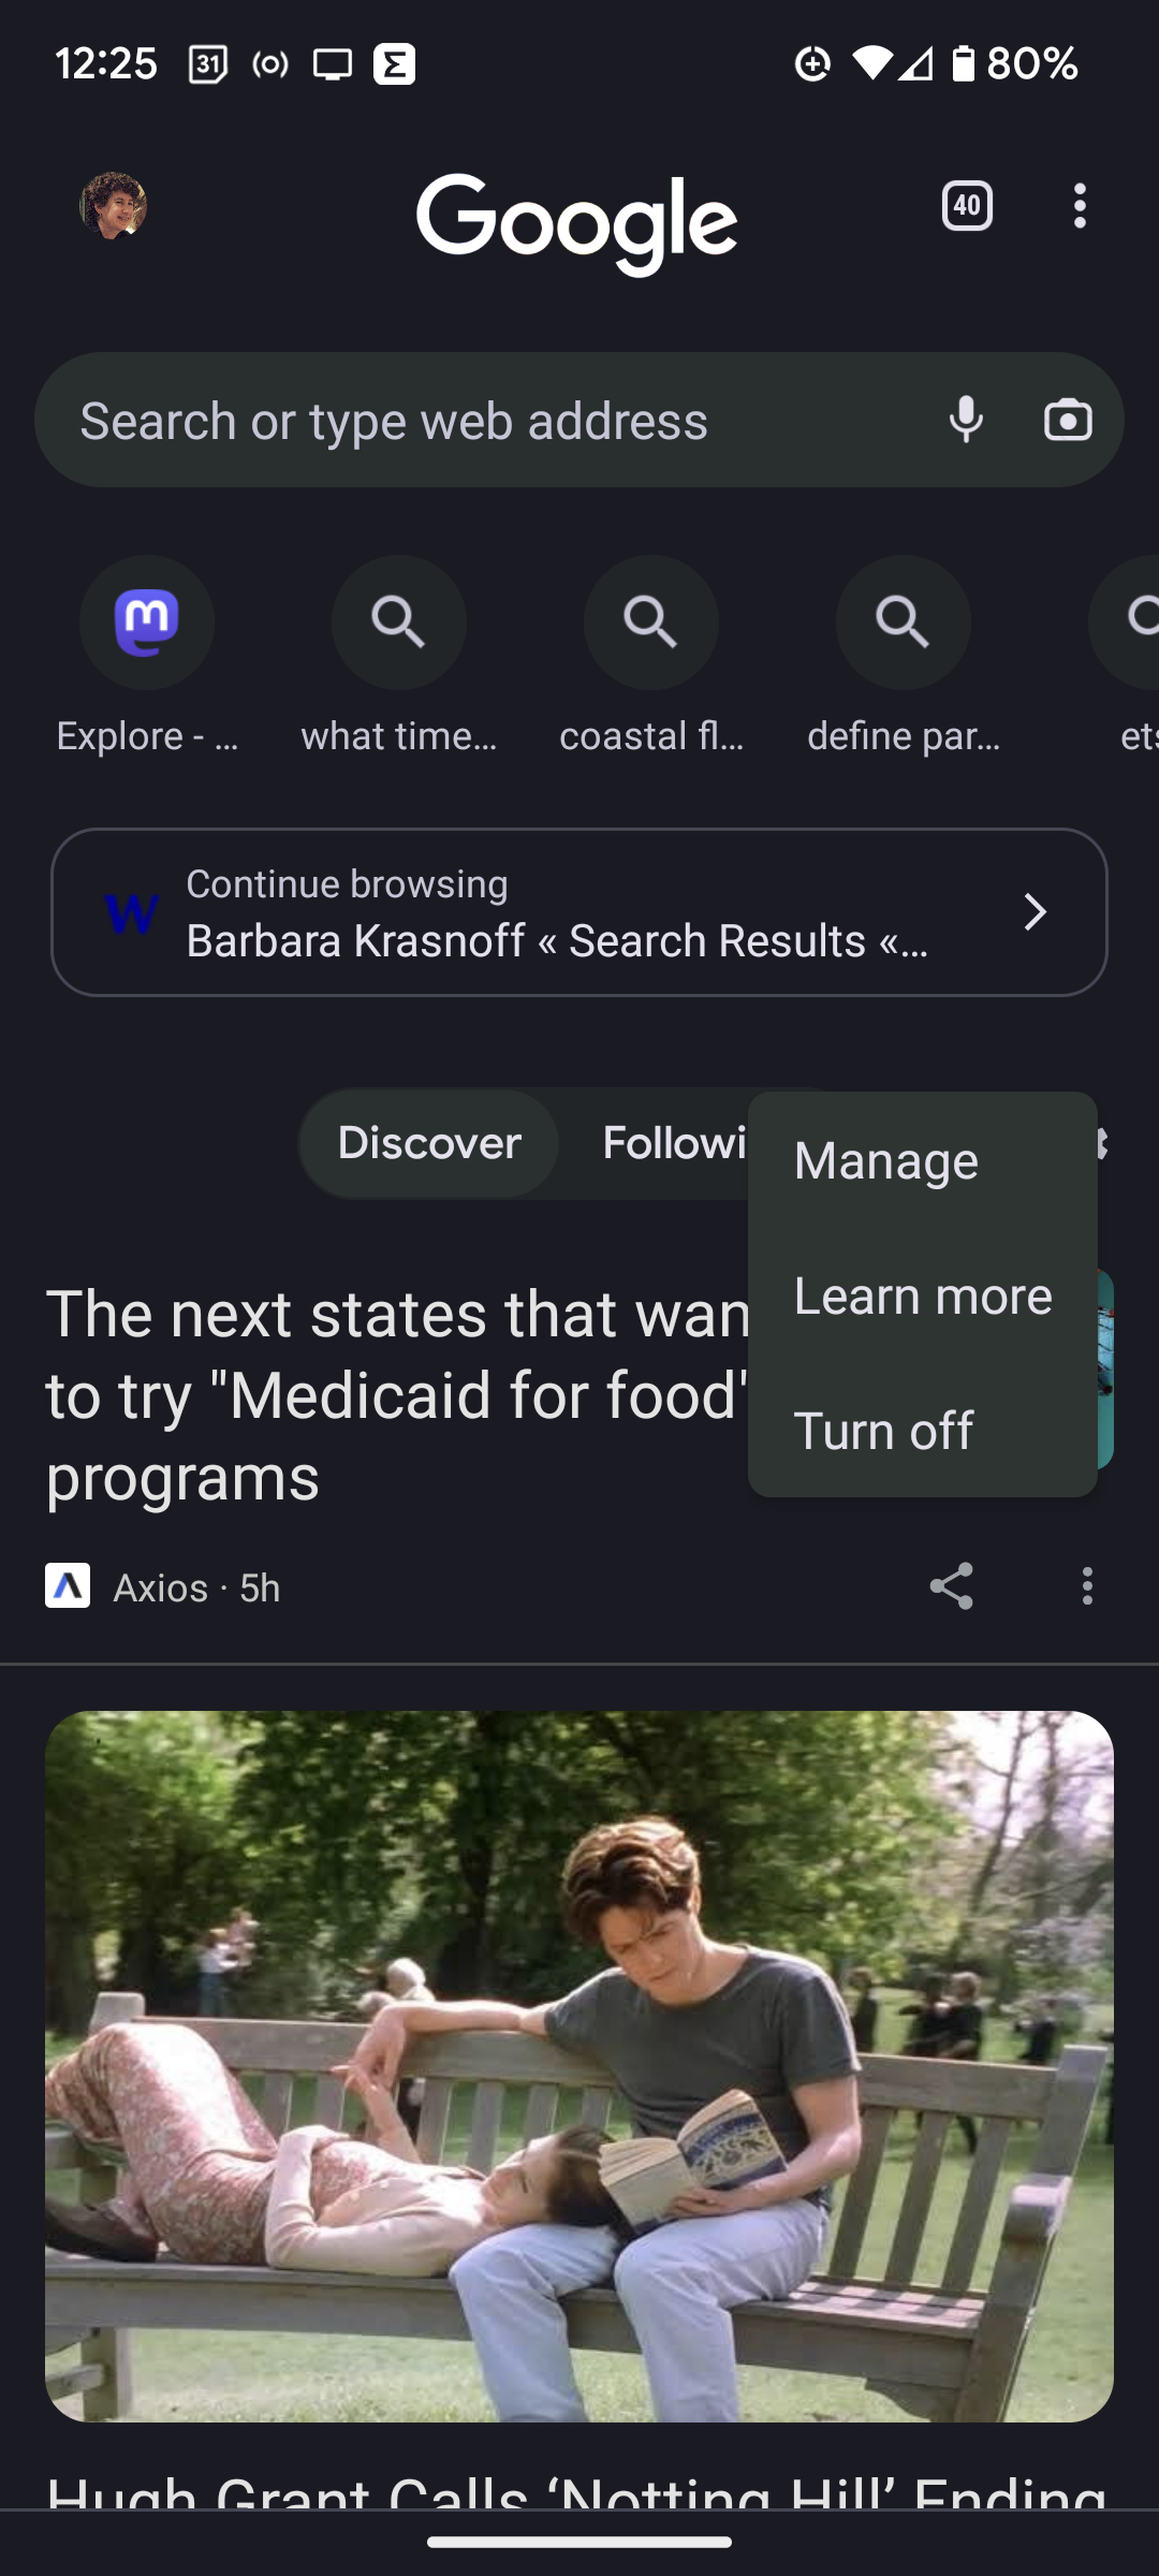 Page with Google on top, search box below that, a row of recent searched with magnifying glass icons below that, Barbara Krasnoff - search reasults below that, and an article about Medicaid below that, with a pop-up menu over it that said Manage, Learn more, Turn off.